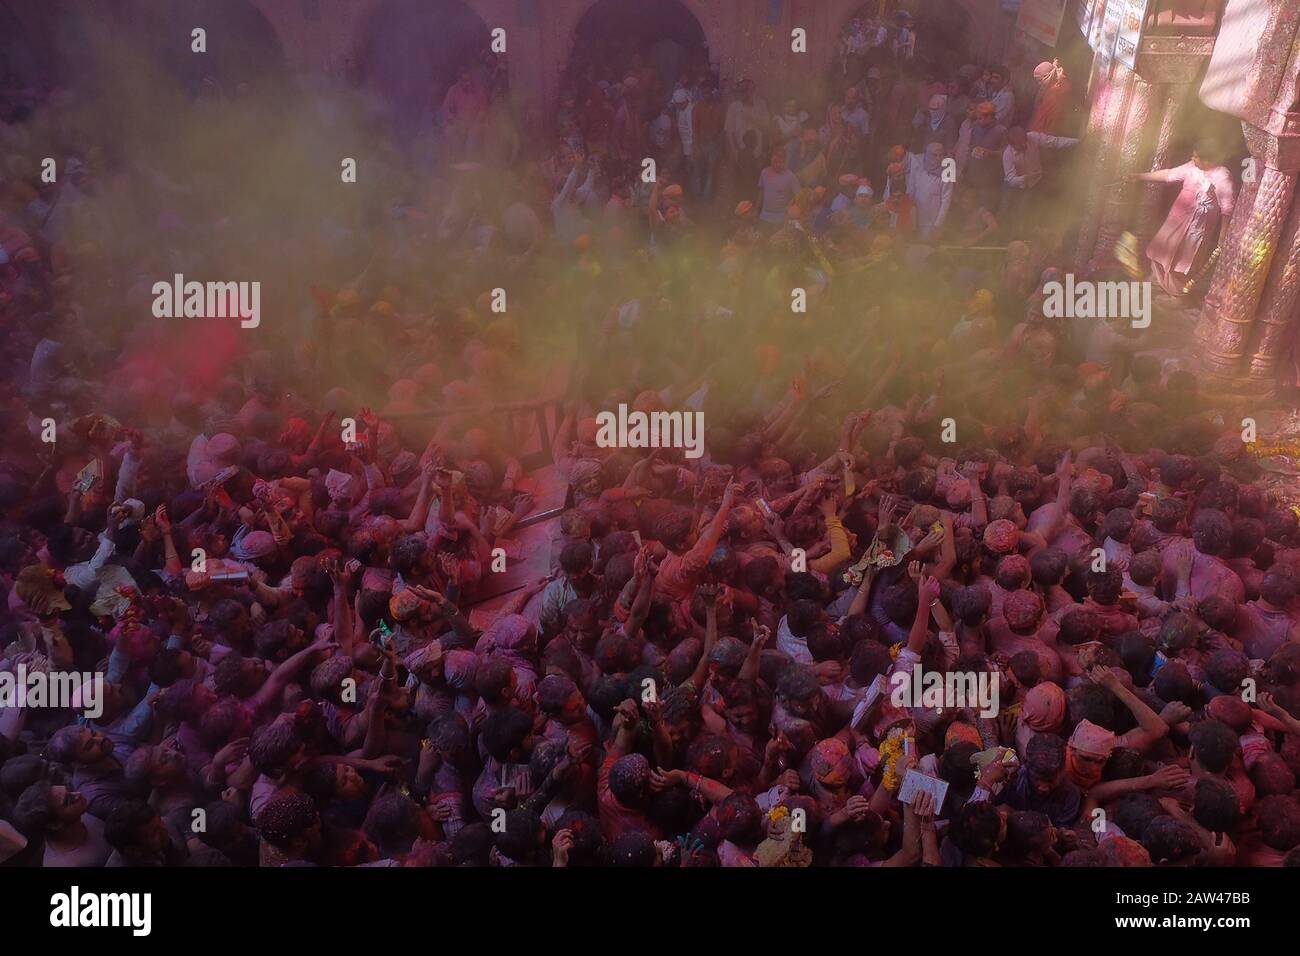 General view crowded during the Hindu Holi Festival in banke bihari temple vrindavan, India, on March 20, 2019. The Hindu Holi Festival takes place in India. The two-day celebration marks the victory of good over evil and marks the end of winter and the arrival of spring. Holi Festival celebrations are usually Indian residents playing water while throwing colorful powder. Stock Photo